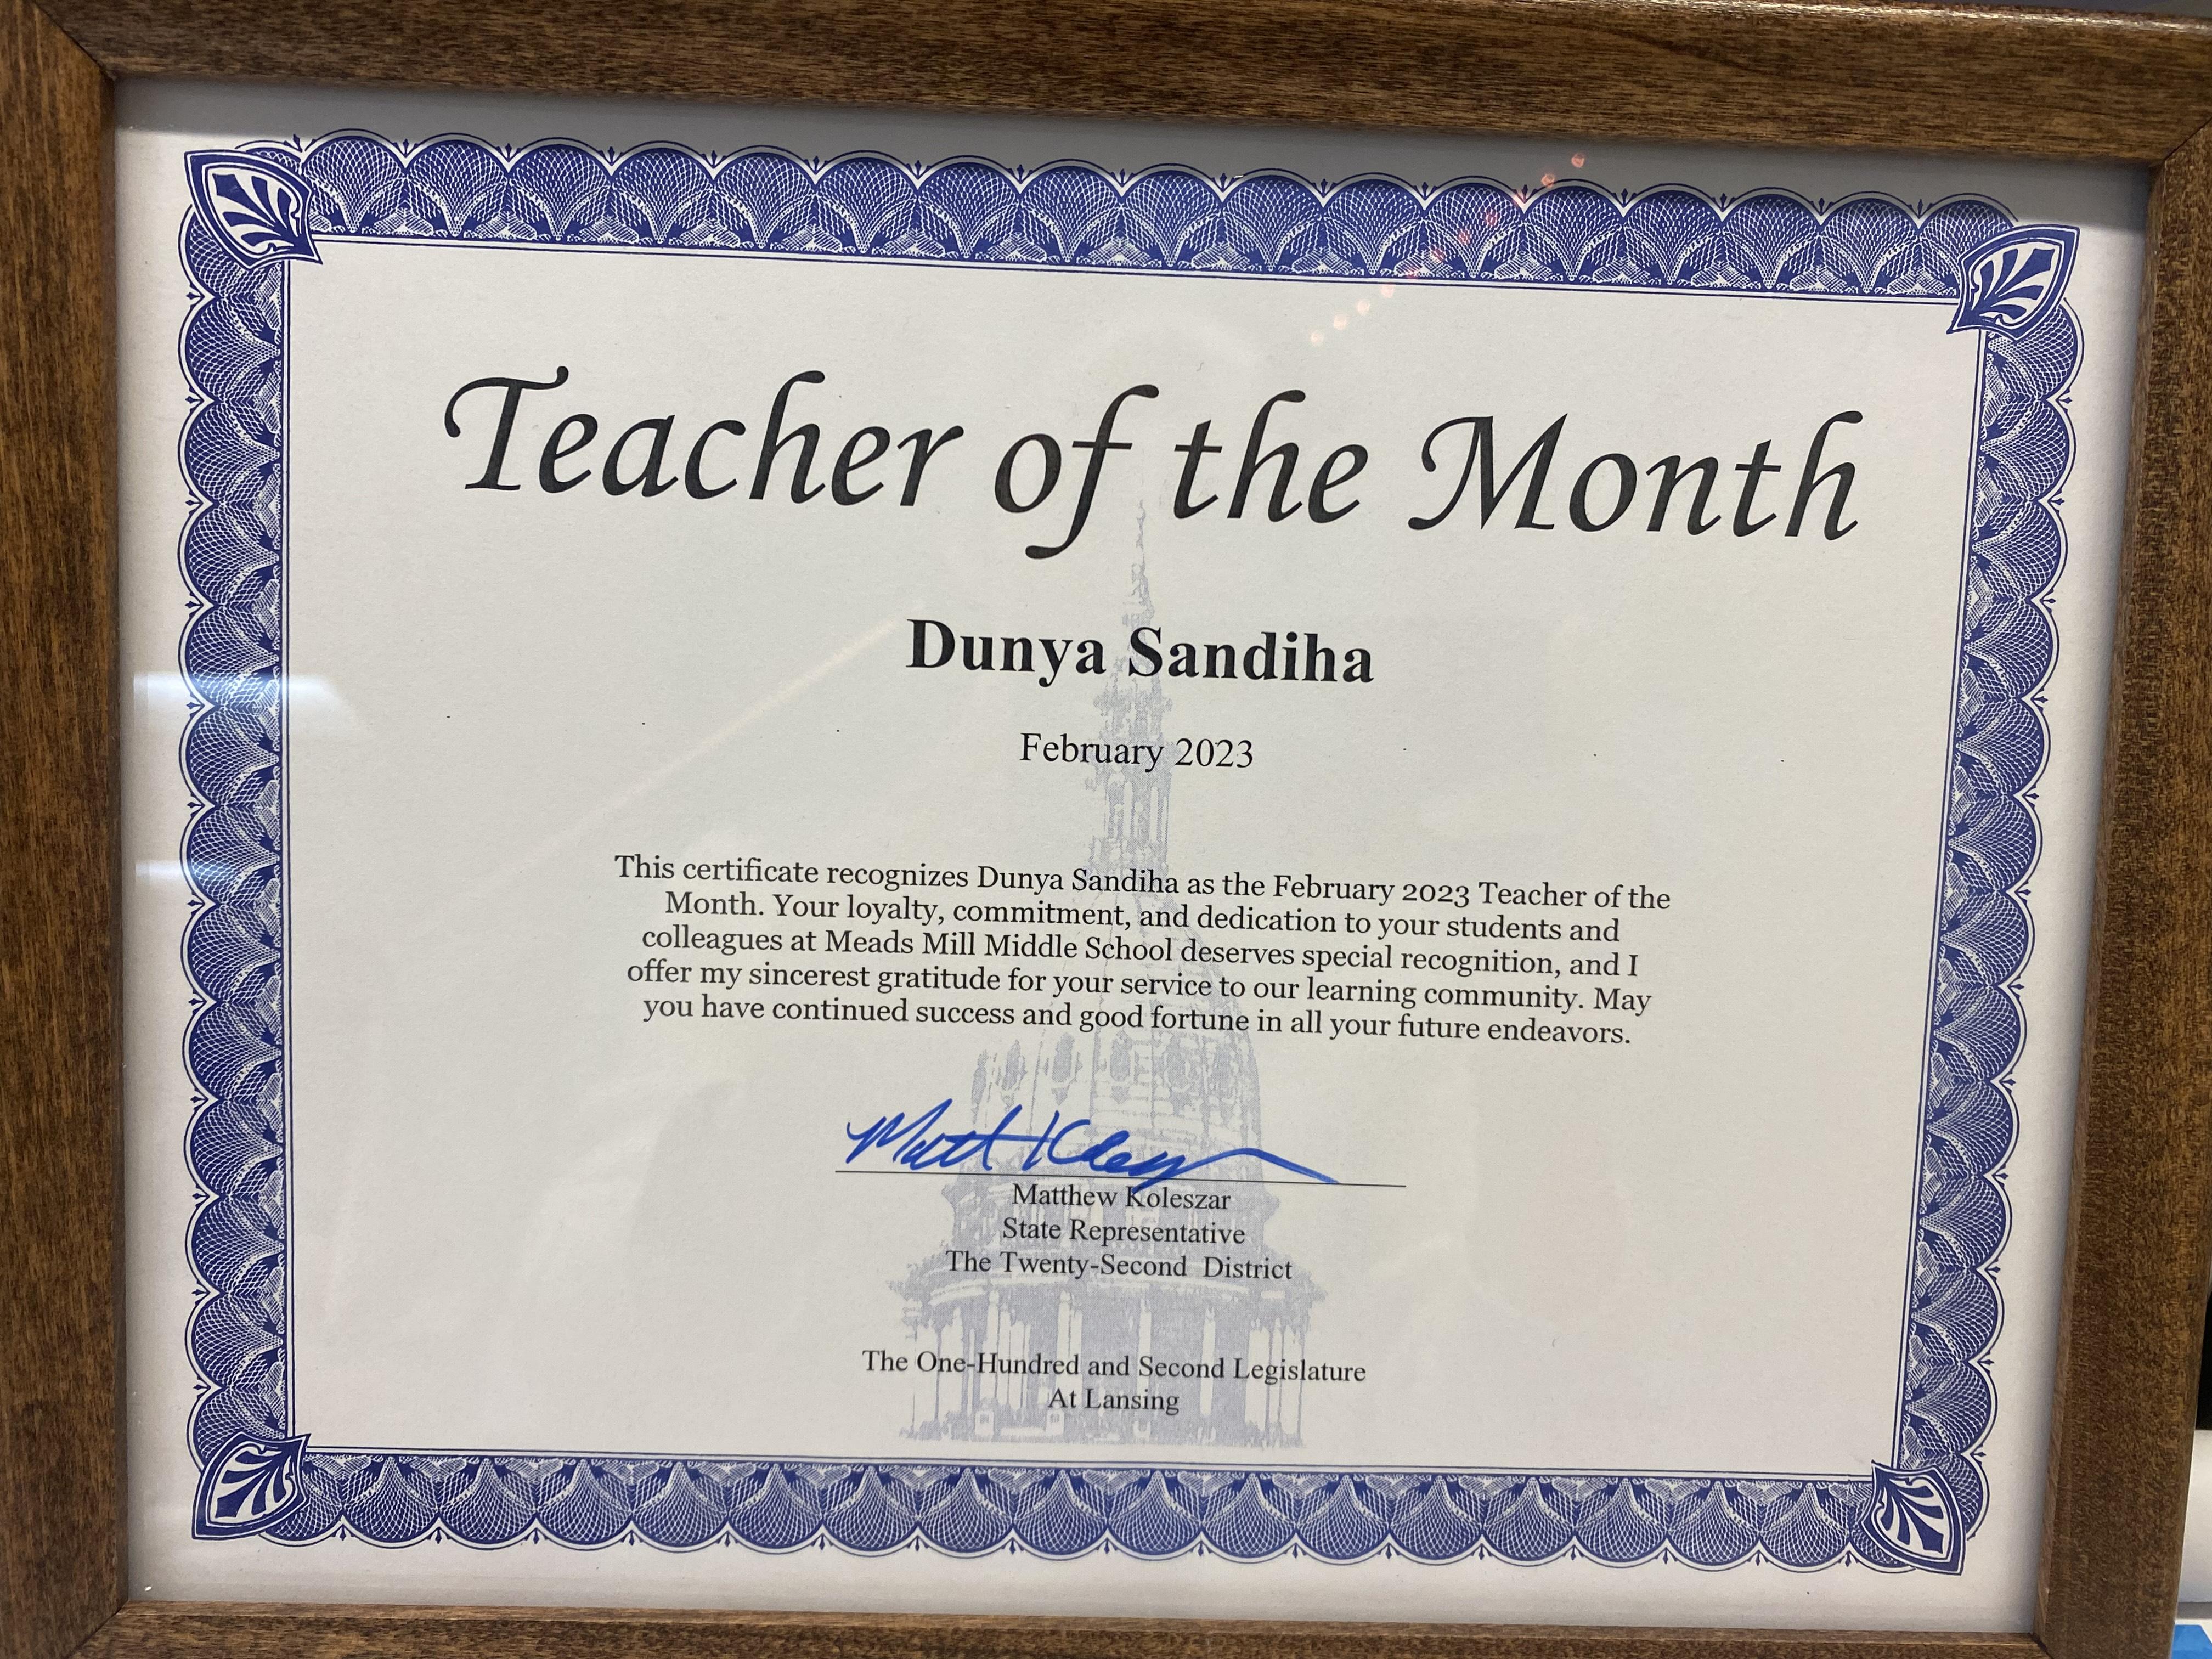 Teacher of the Month Dunya Sandiha February 2023 This certificate recognizes Dunya Sandiha as the February 2023 Teacher of the Month. Your loyalty, commitment, and dedication to your students and colleagues at Meads Mill Middle School deserves special recognition, and I offer my sincerest gratitude for your service to our learning community. May you have continued success and good fortune in all your future endeavors. Matthew Koleszar, State Representative, the 22nd district